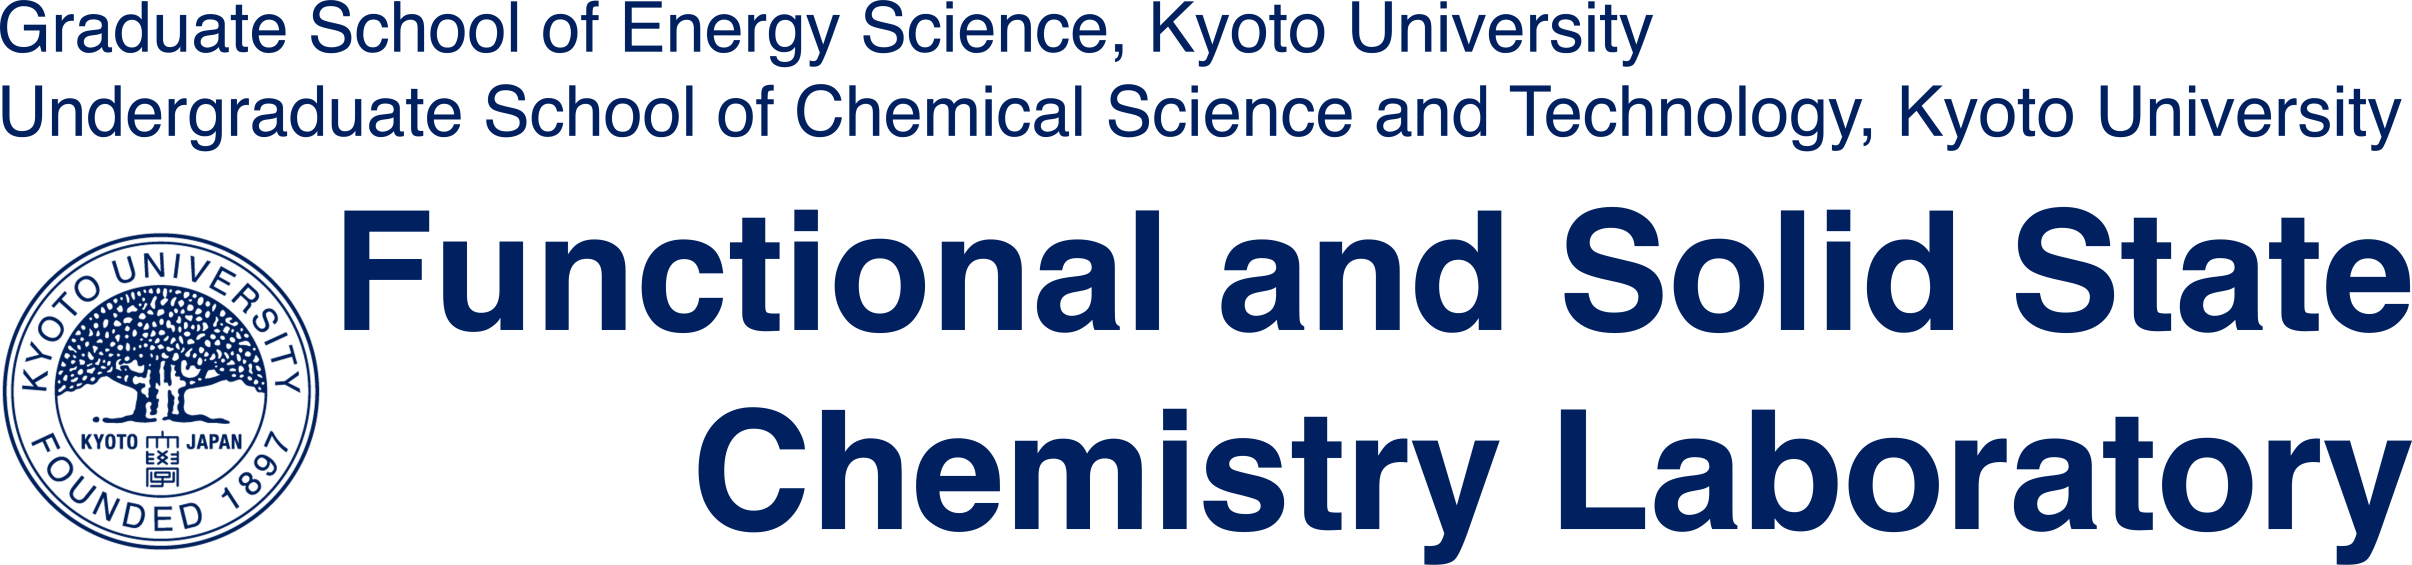 Functional and Solid State Chemistry Laboratory, Graduate School of Energy Science, Kyoto University